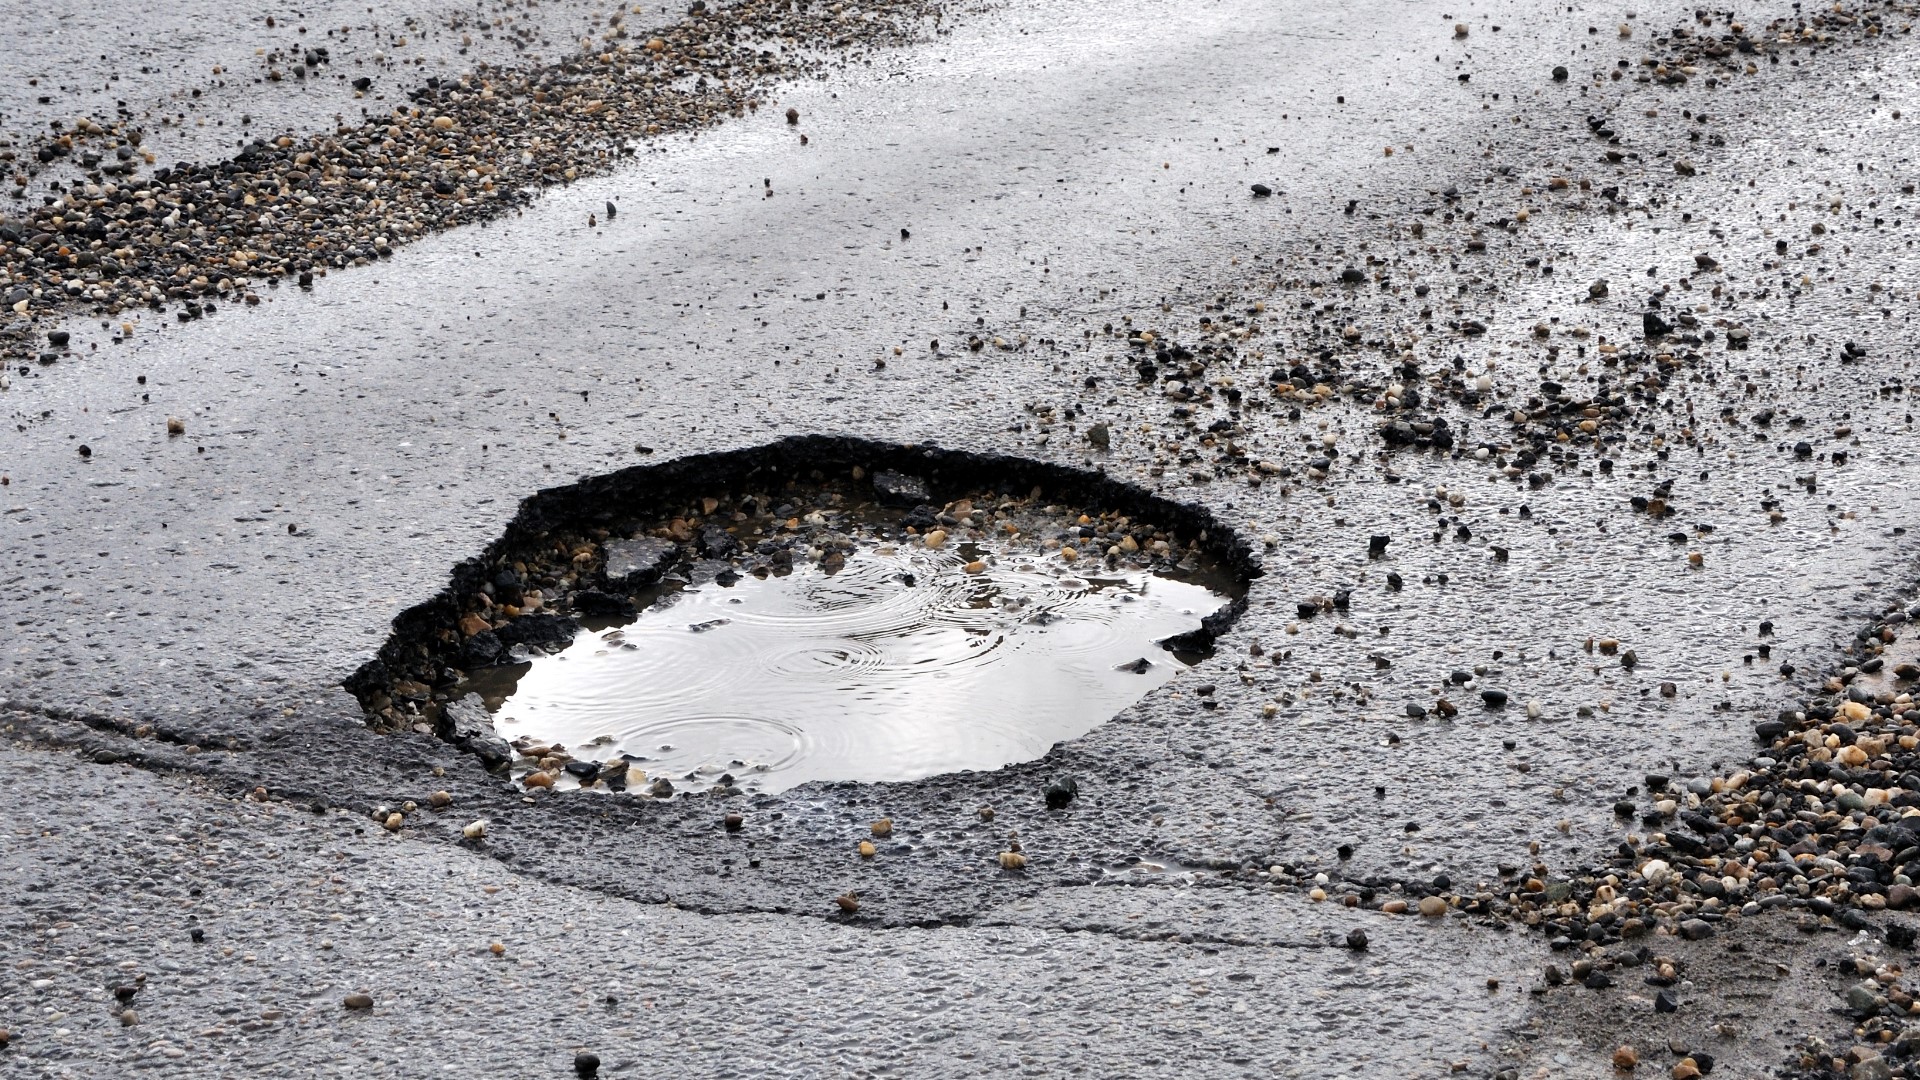 More than 17,000 potholes have been filled in Louisville since the start of 2023, according to Mayor Craig Greenberg.